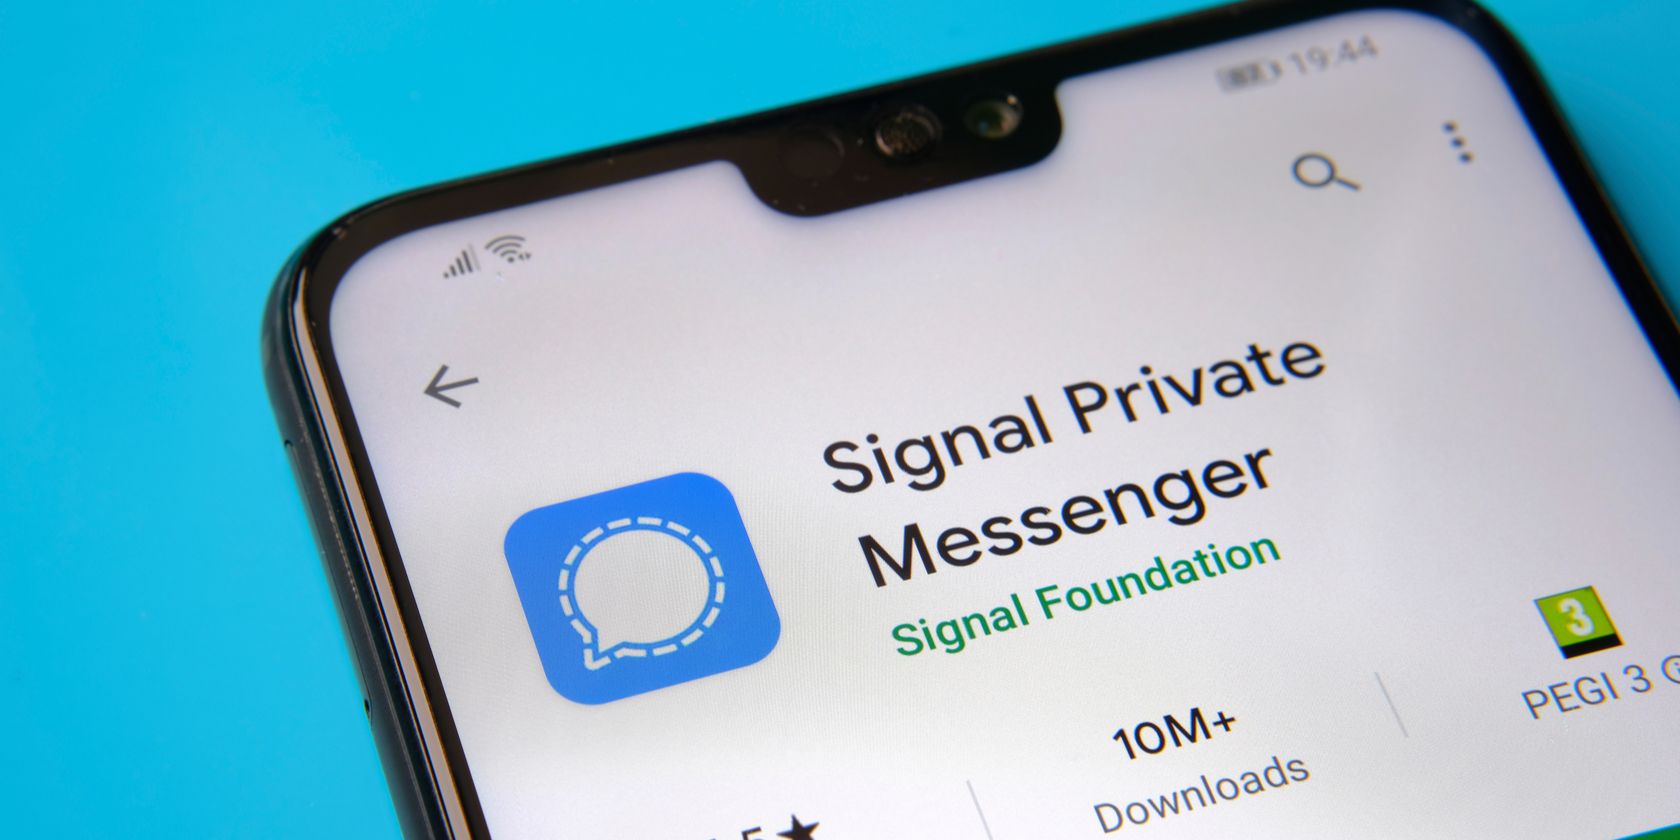 How to Switch From WhatsApp to Signal